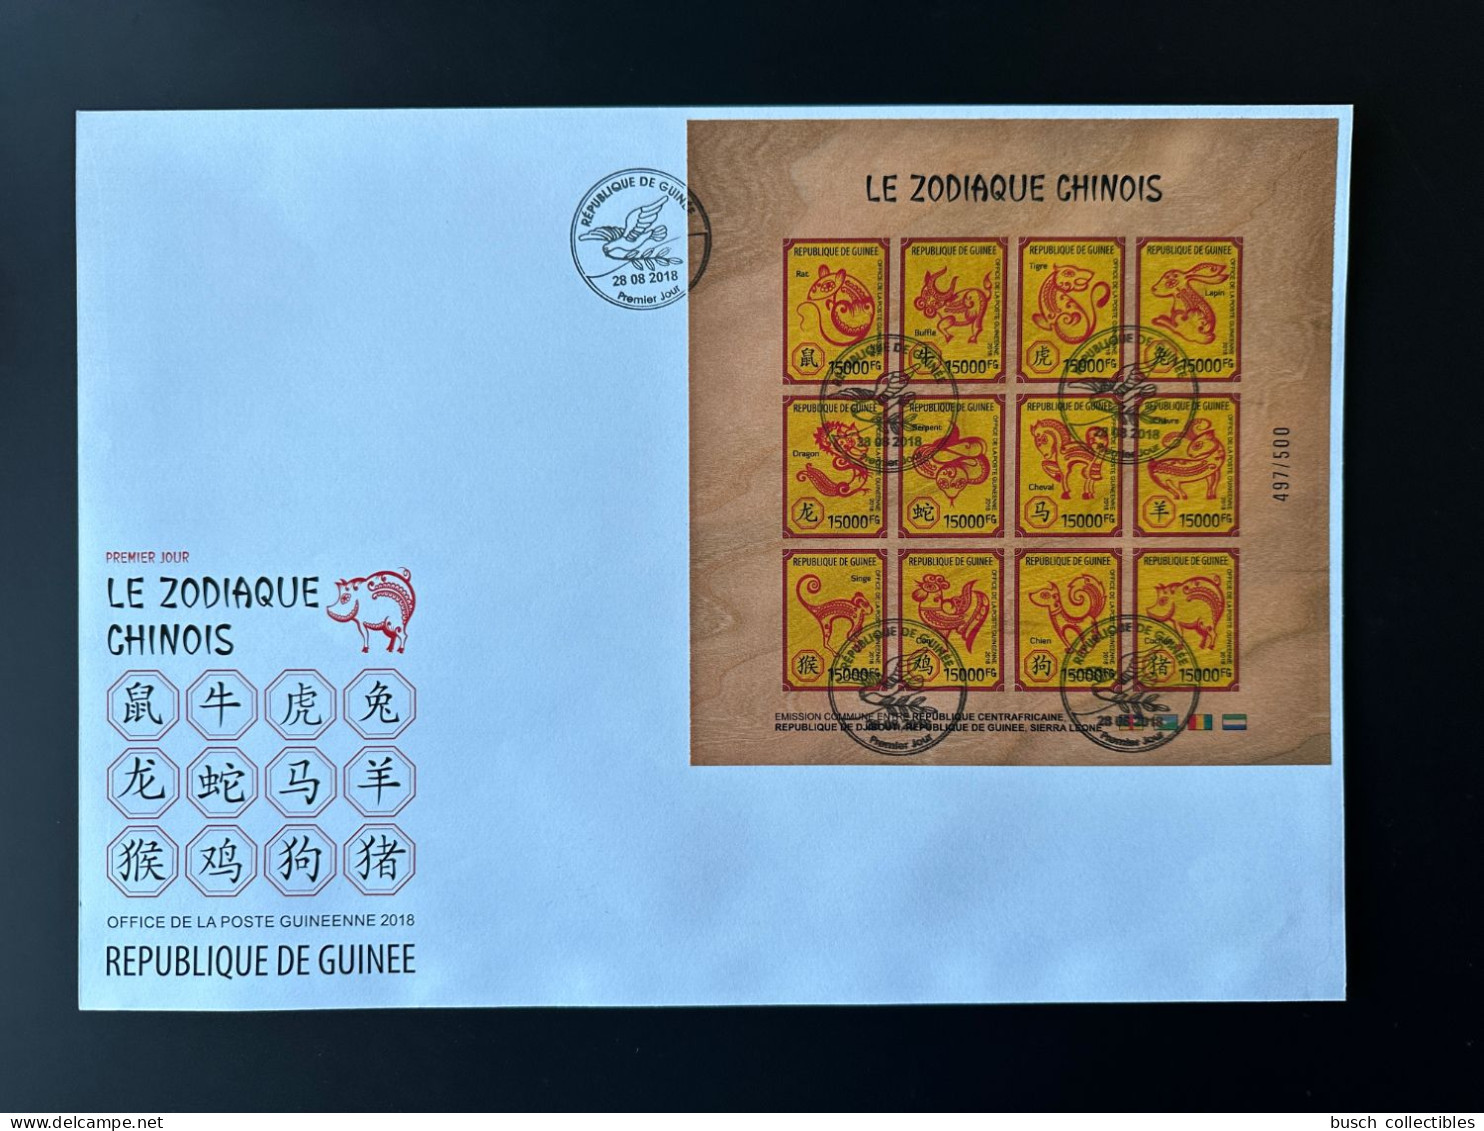 IMPERF NON DENTELE Guinée Guinea 2018 FDC Wooden Holzfurnier Bois Chinese Zodiac Zodiaque Chinois Joint Issue - Emisiones Comunes